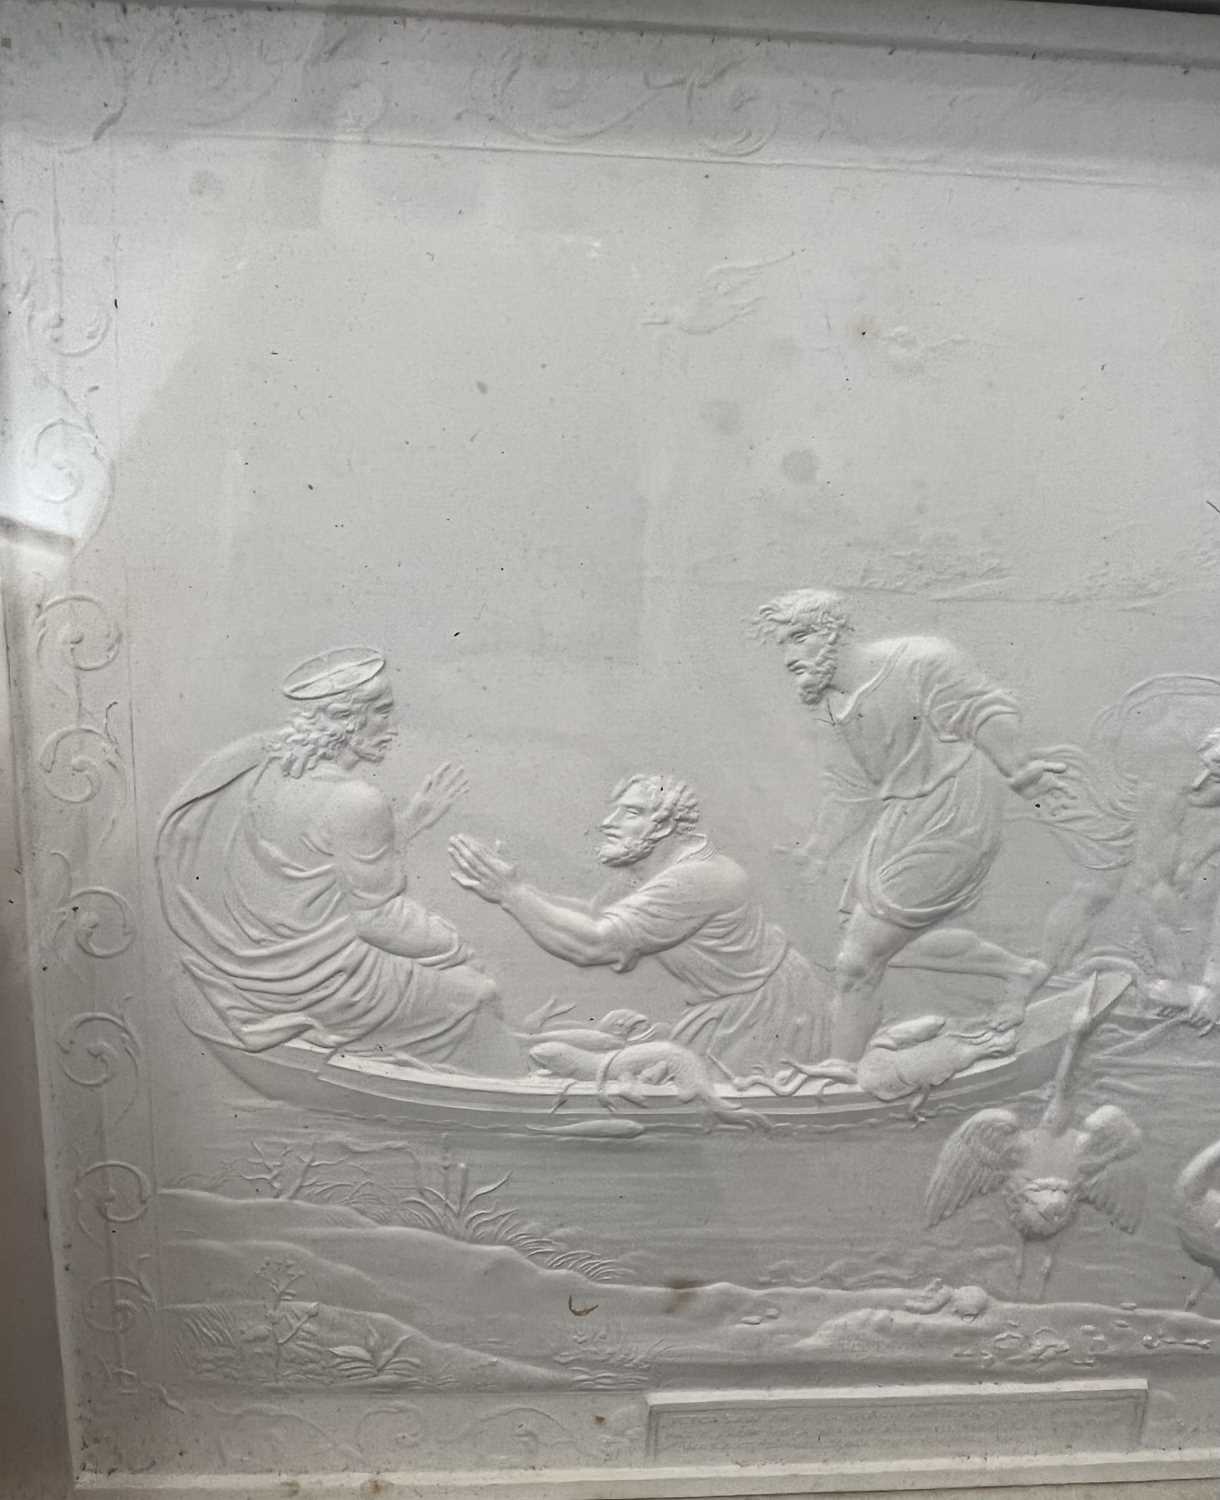 A SET OF EARLY 19TH CENTURY GRAND TOUR PLASTER RELIEFS AFTER RAPHAEL CIRCA 1820 - Image 4 of 4